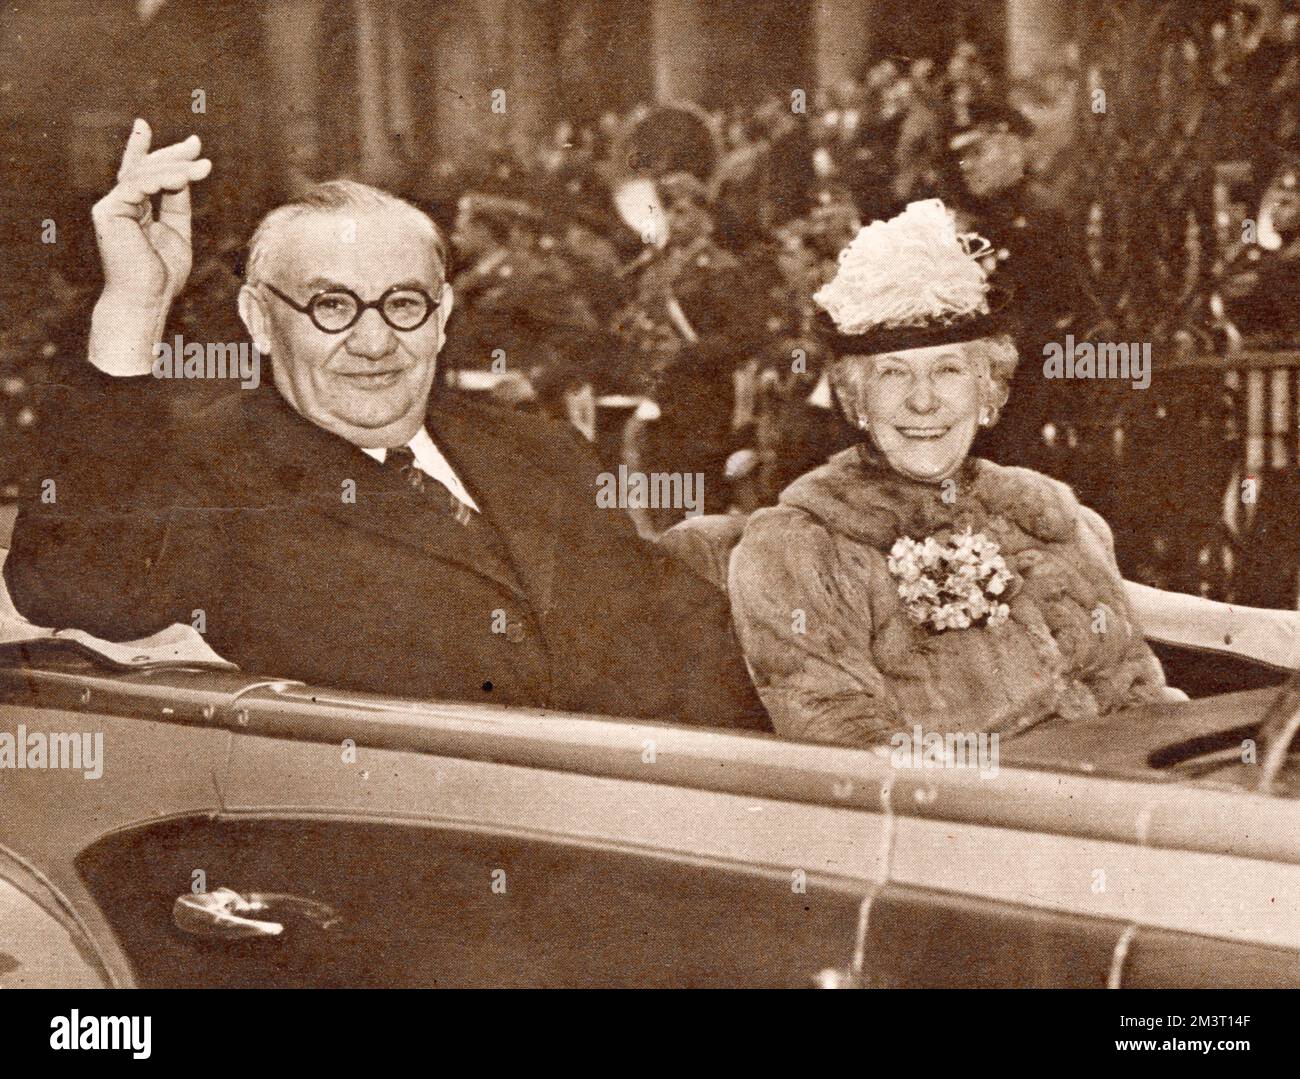 Ernest Bevin, at the time Foreign Secretary, pictured with his wife on a visit to New York in 1946 as a representative of the UK at the United Nations. Stock Photo